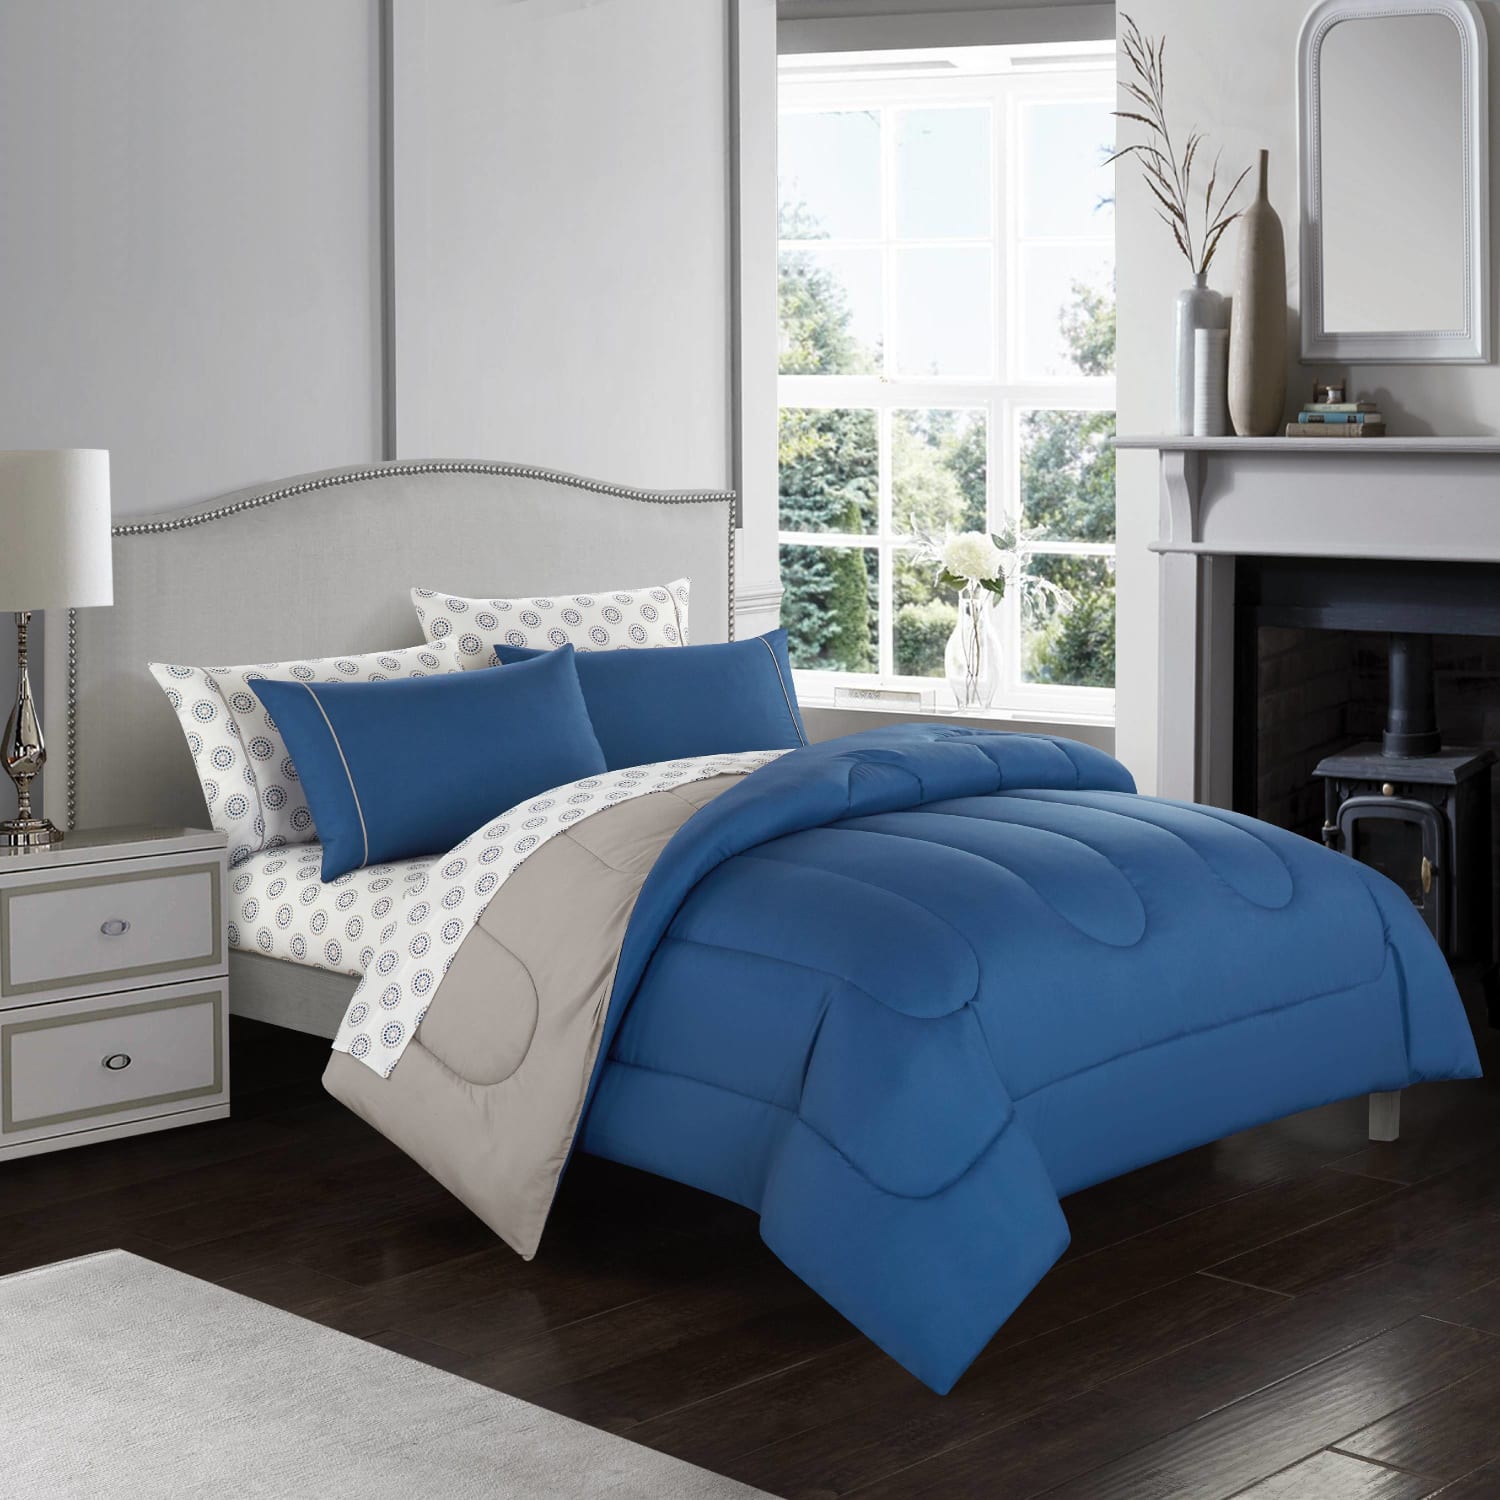 Denim Check Luxurious Duvet Covers Quilt Cover Reversible Bedding Sets All Sizes